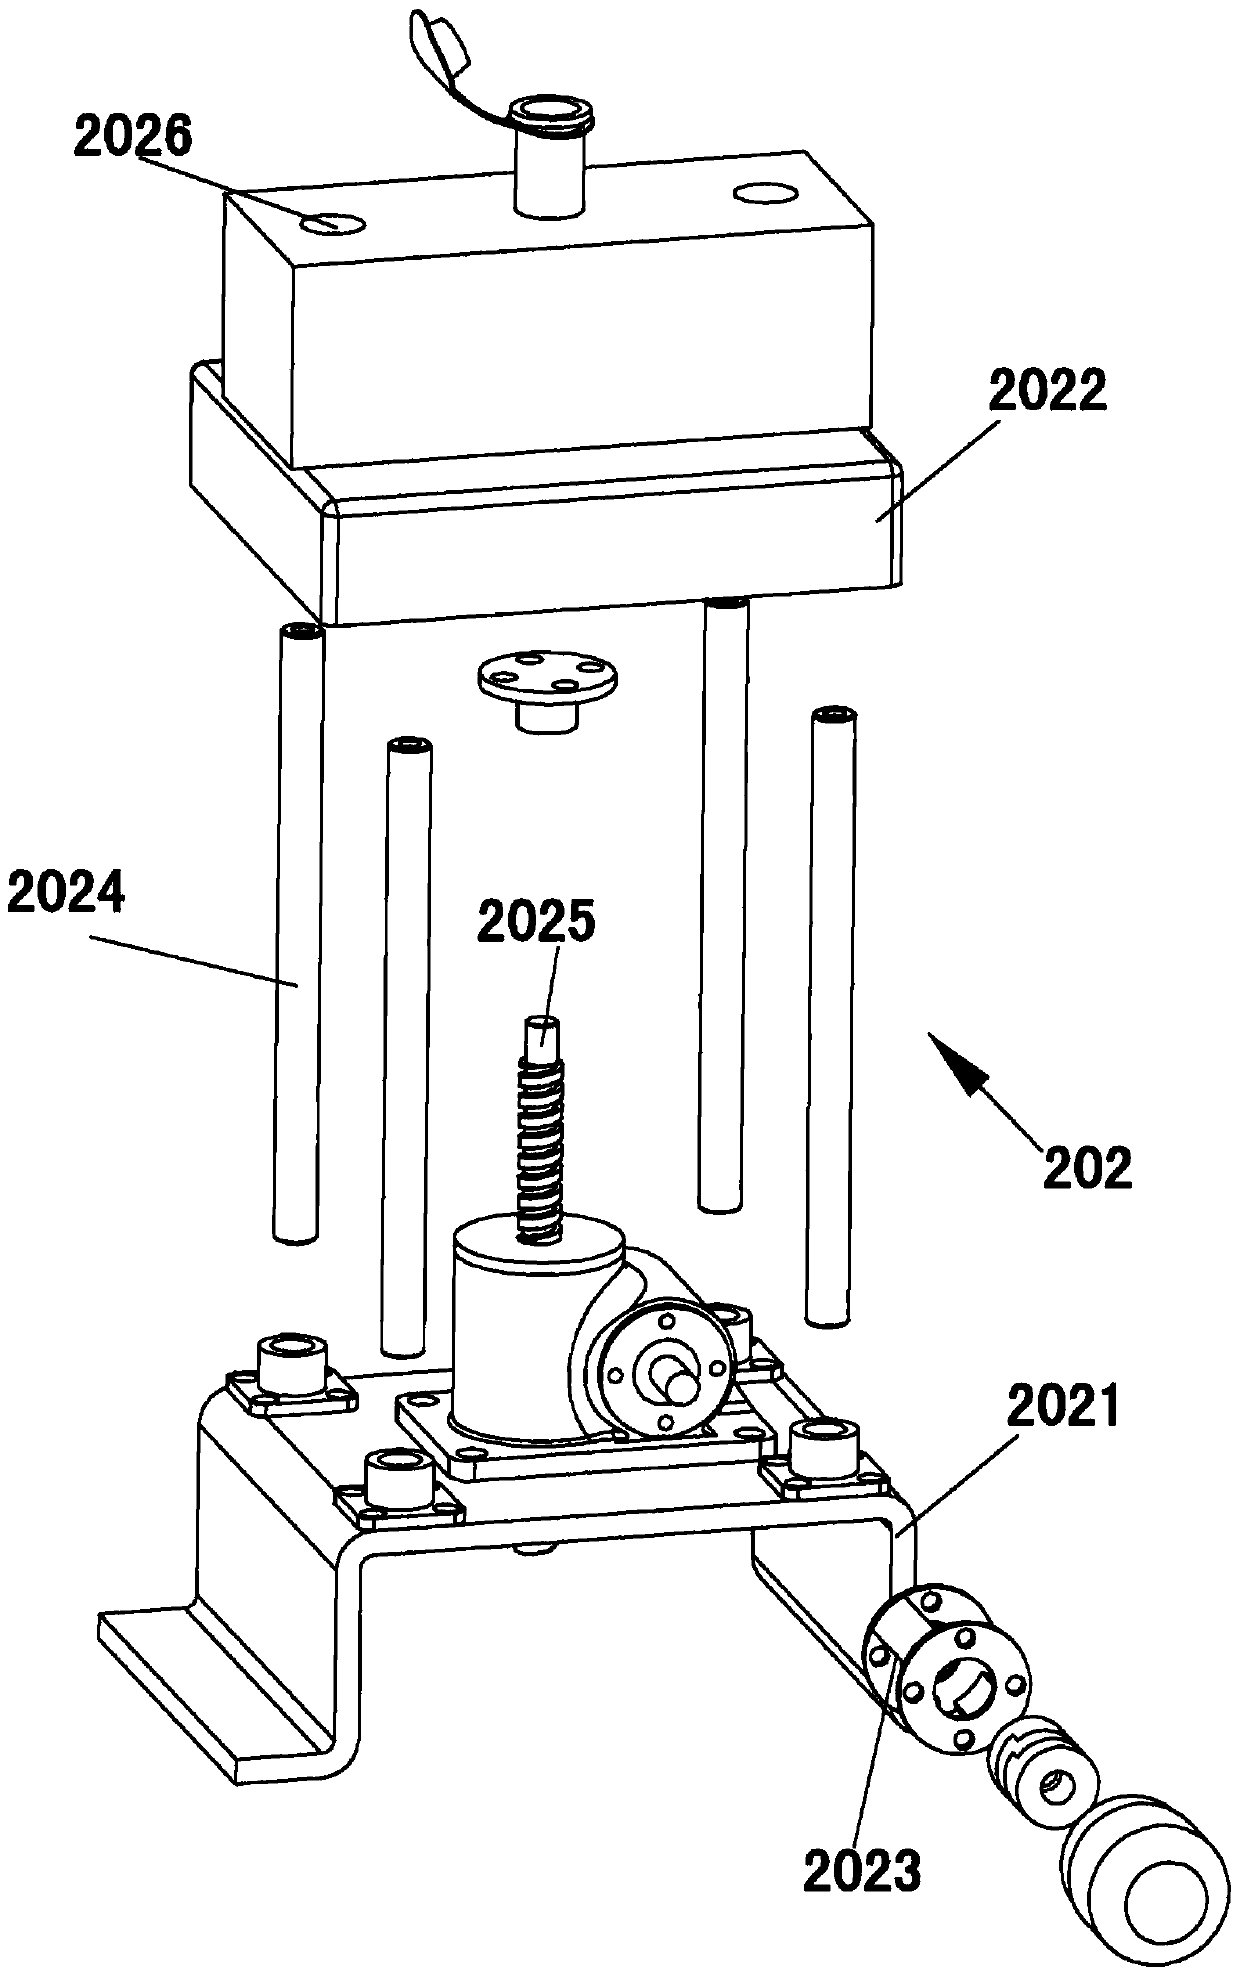 Sample automatic-treatment system